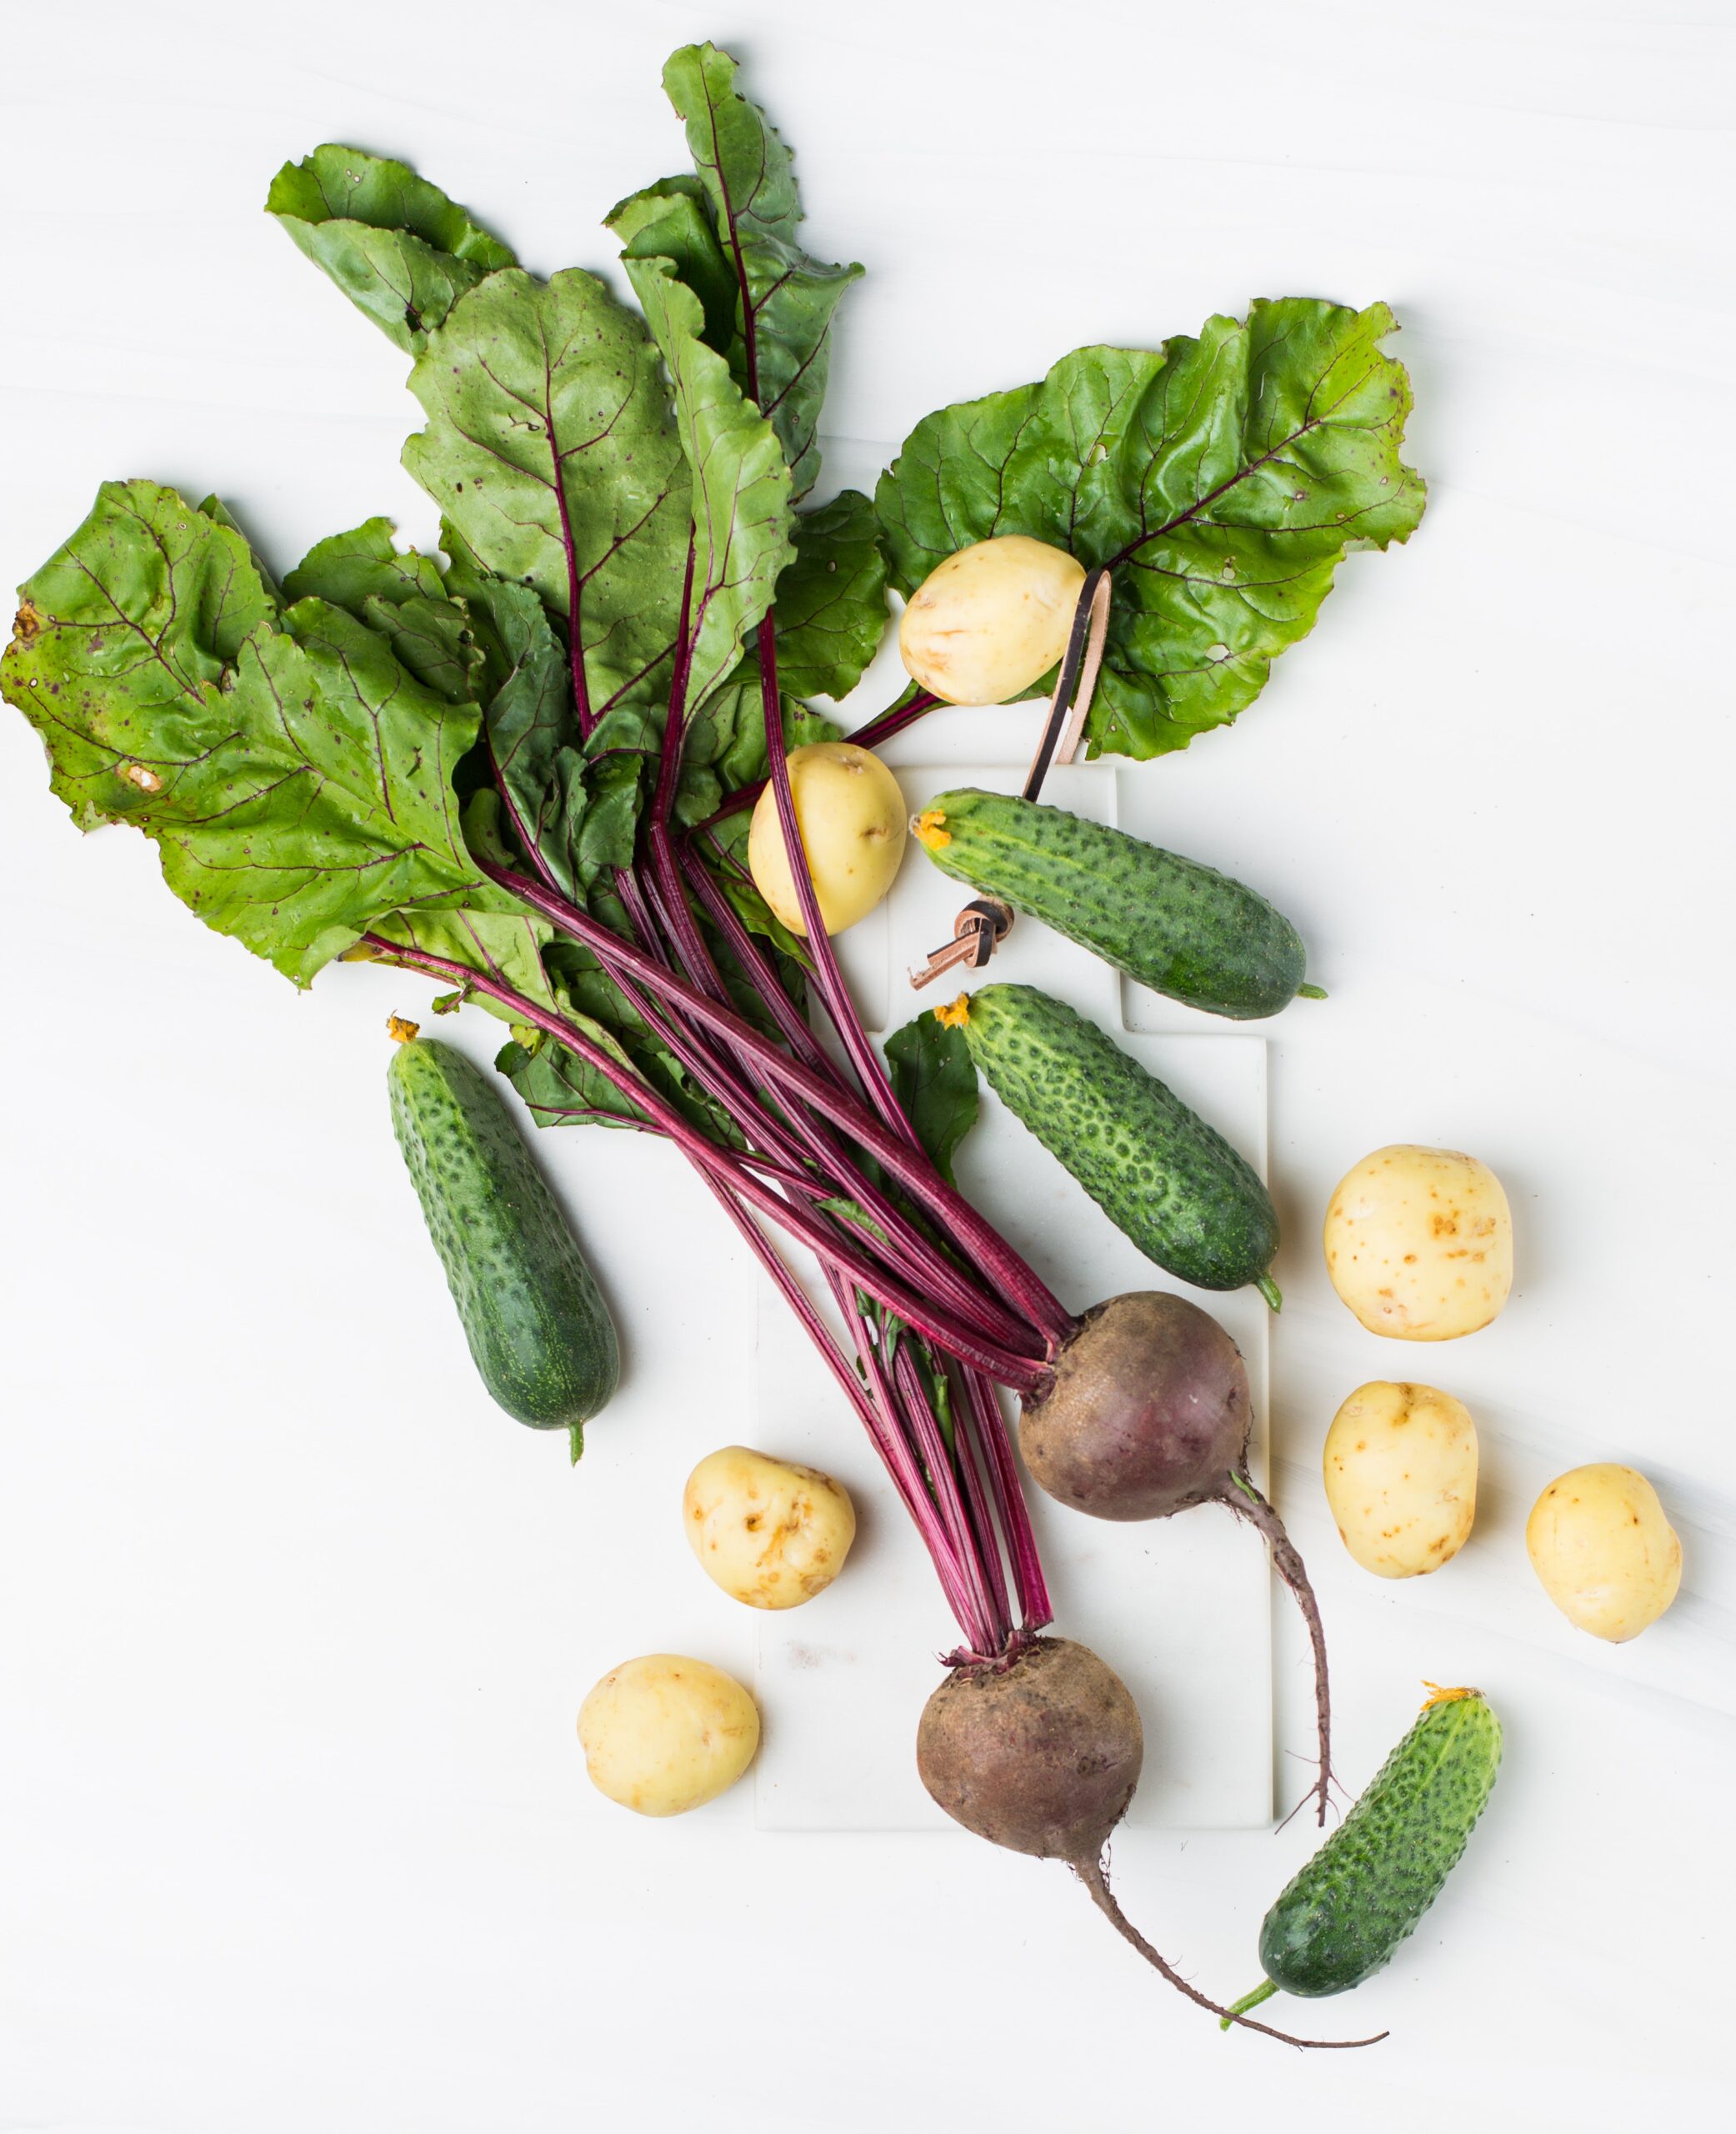 Photo of assorted vegetables on white background